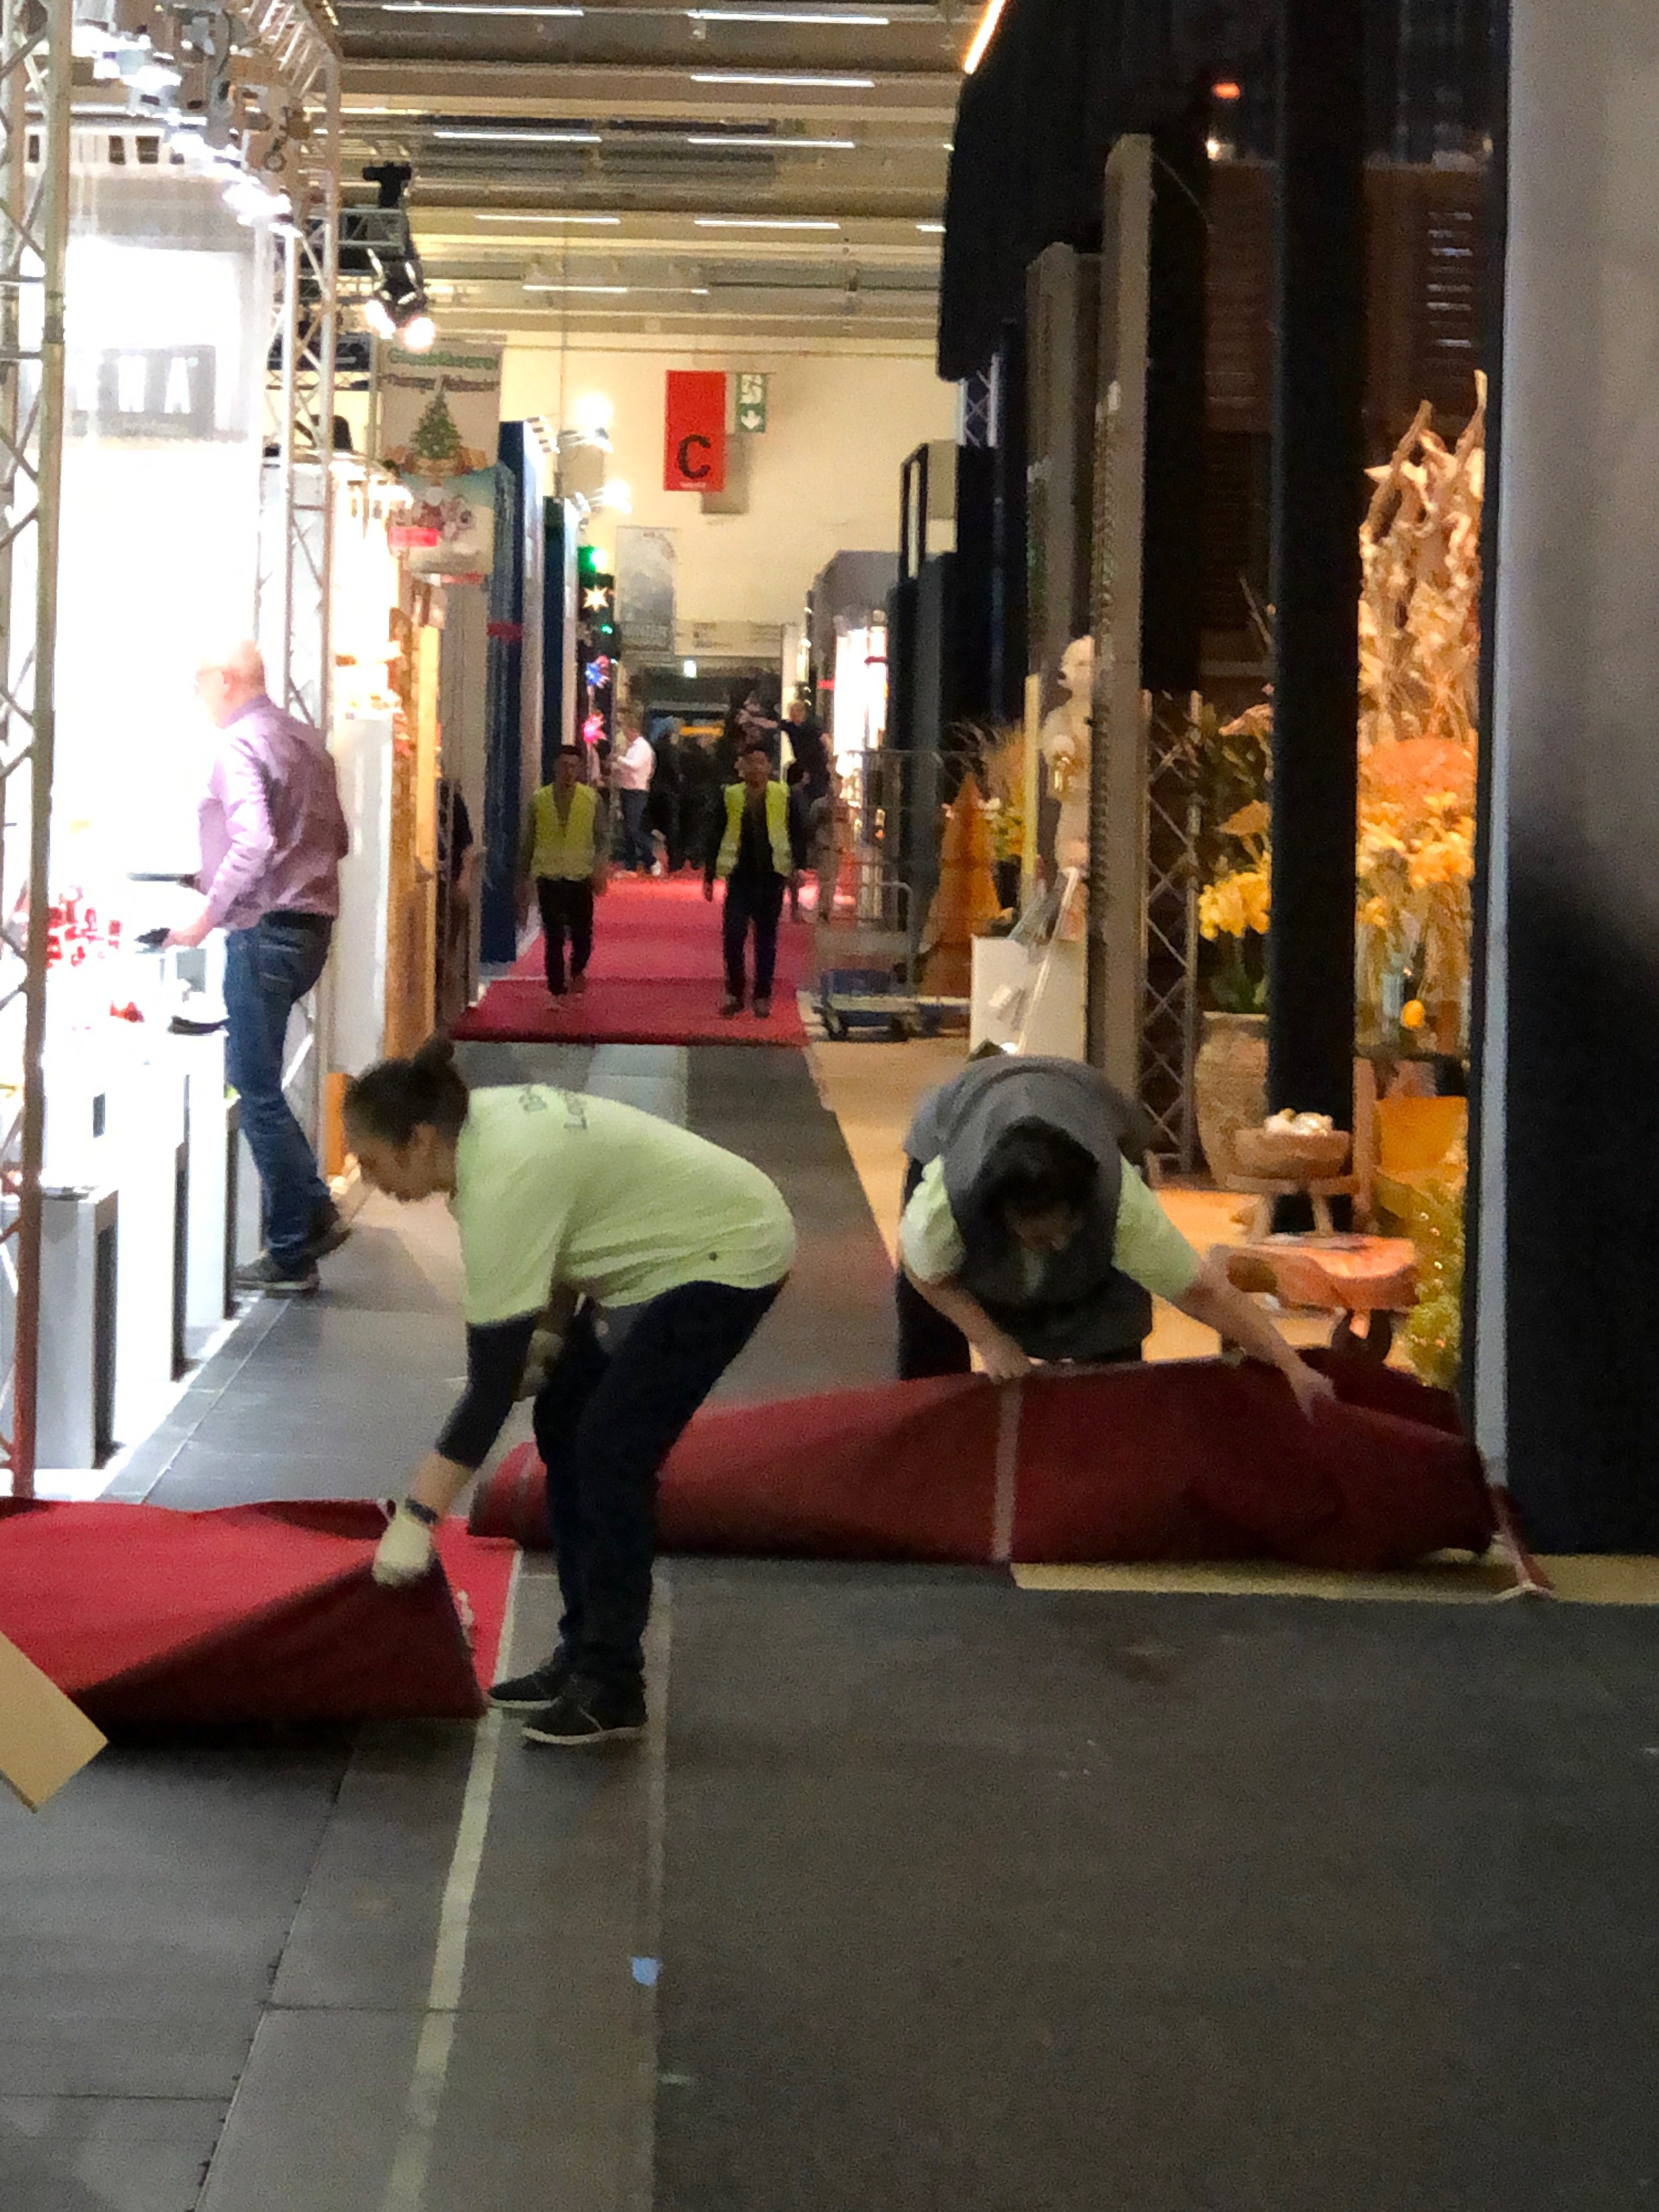 An image of the Christmas Germany event closed and workers starting to take out the carpet